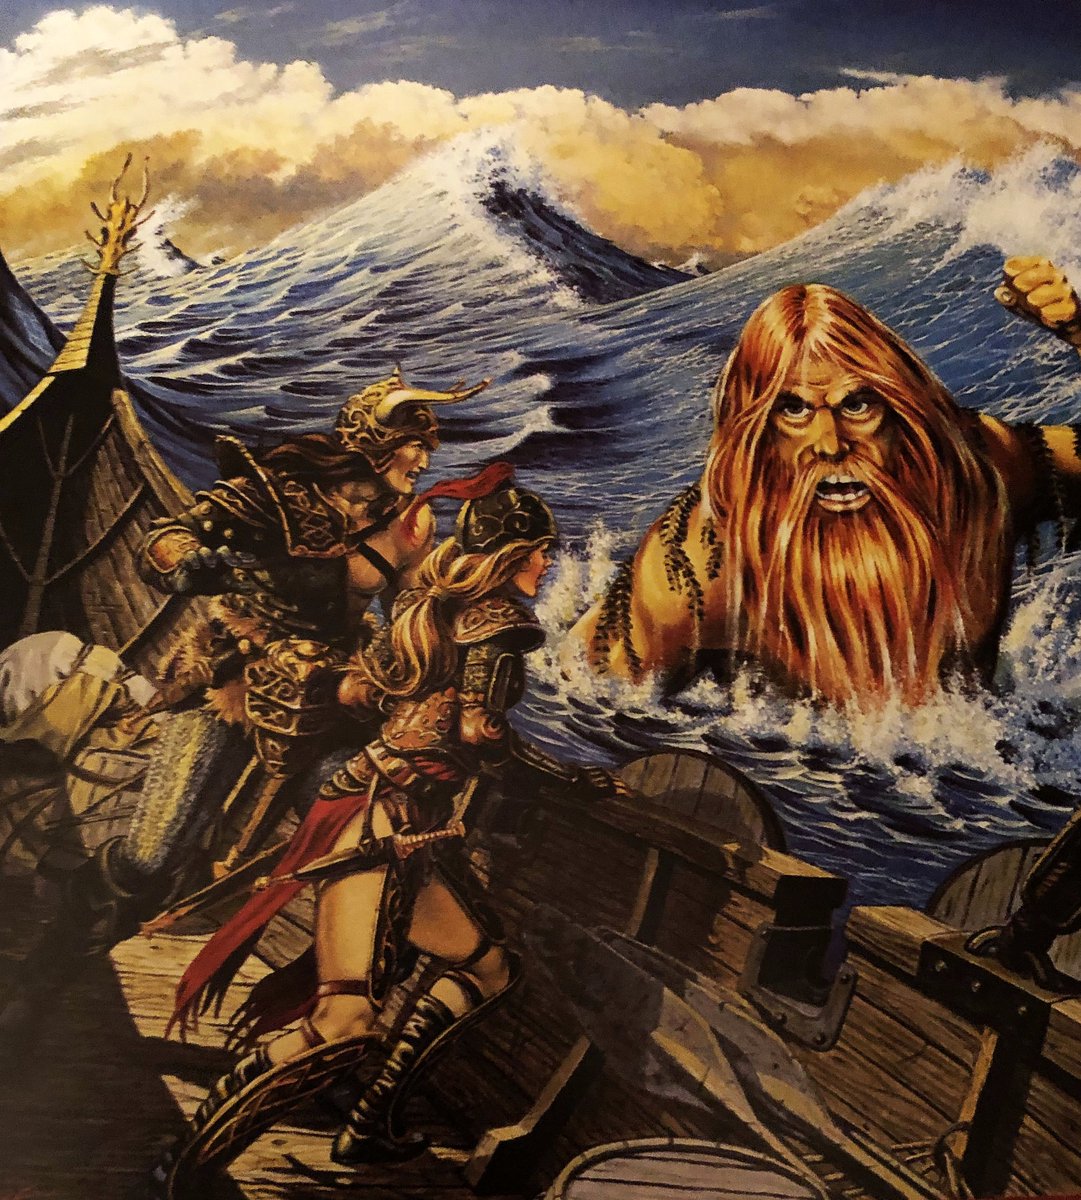 The War Rafts of Kron cover by Larry Elmore (1984) #dndart